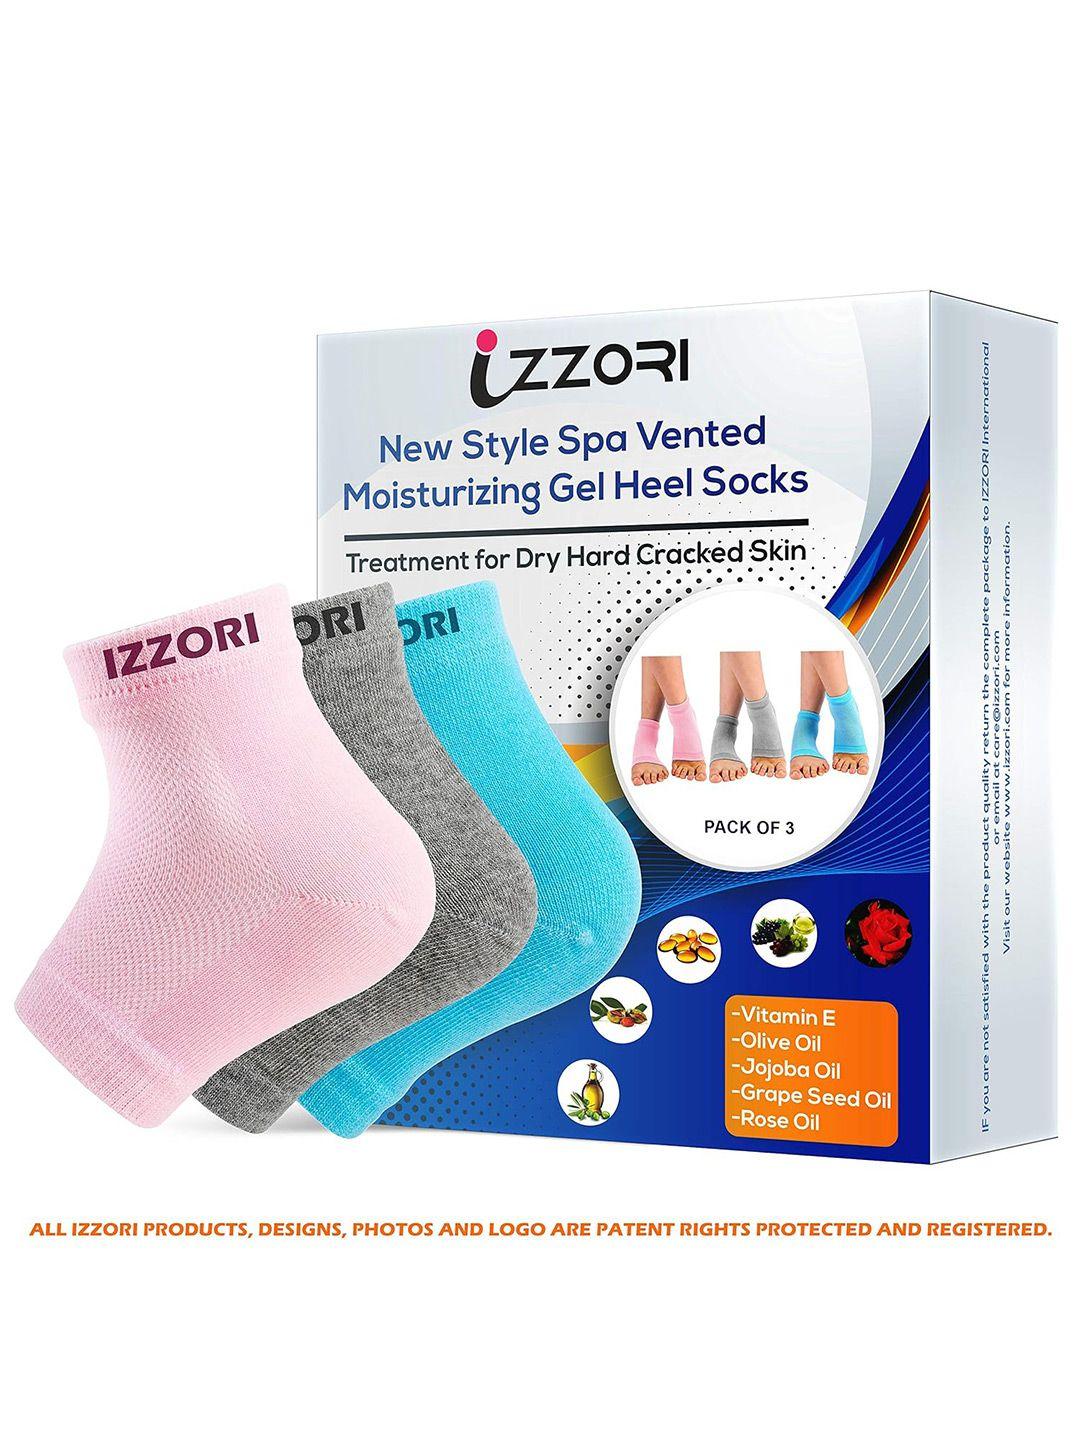 mountainor pack of 3 silicone gel dry hard cracked heel ankle length socks